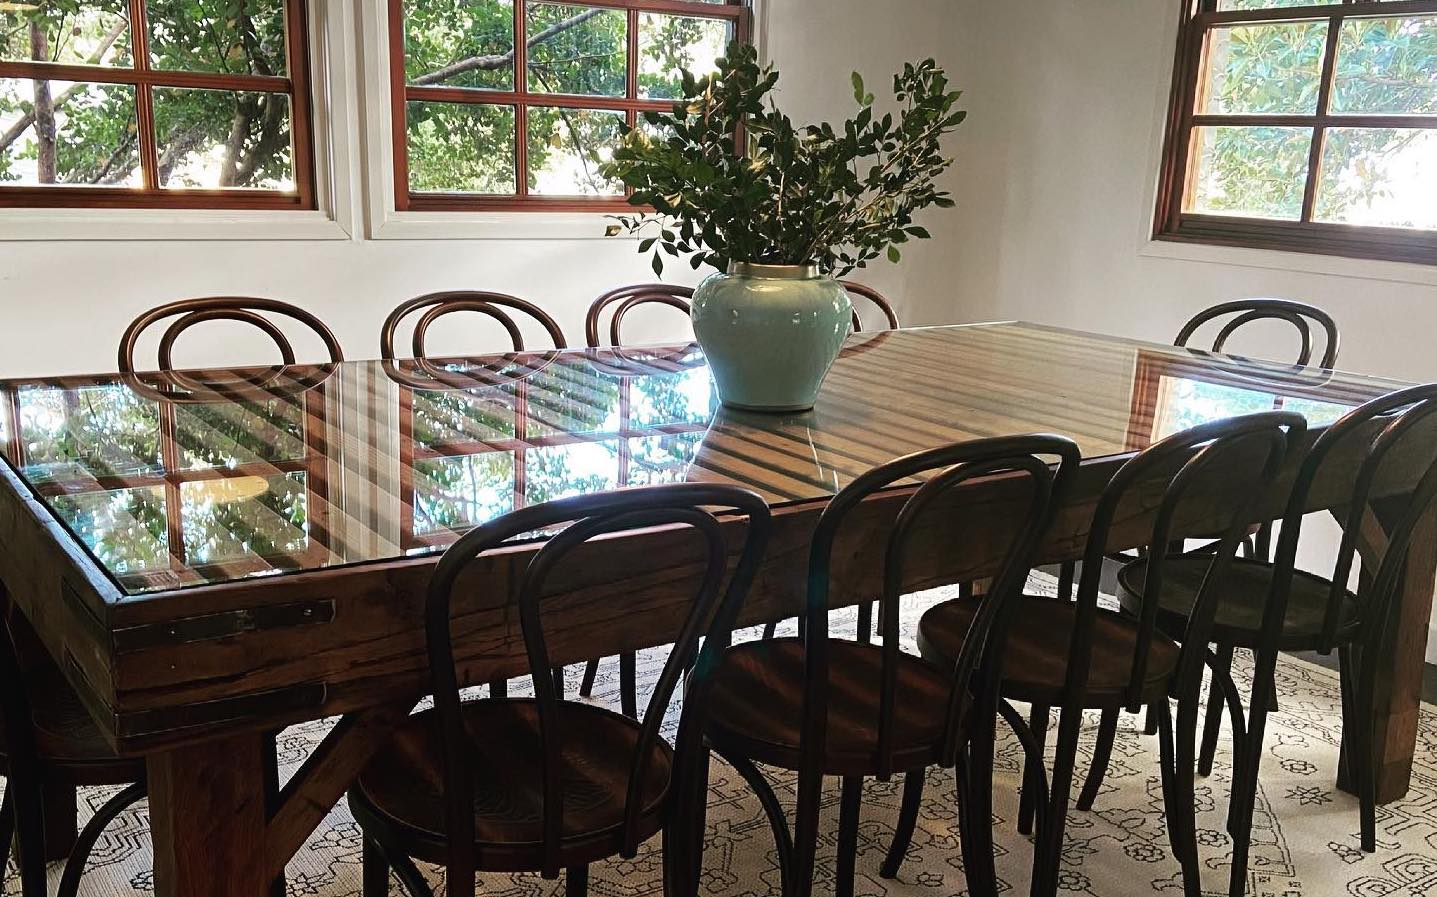 Antique wool classing table with timber restoration completed by Luxe & Humble - Toowoomba furniture restorers